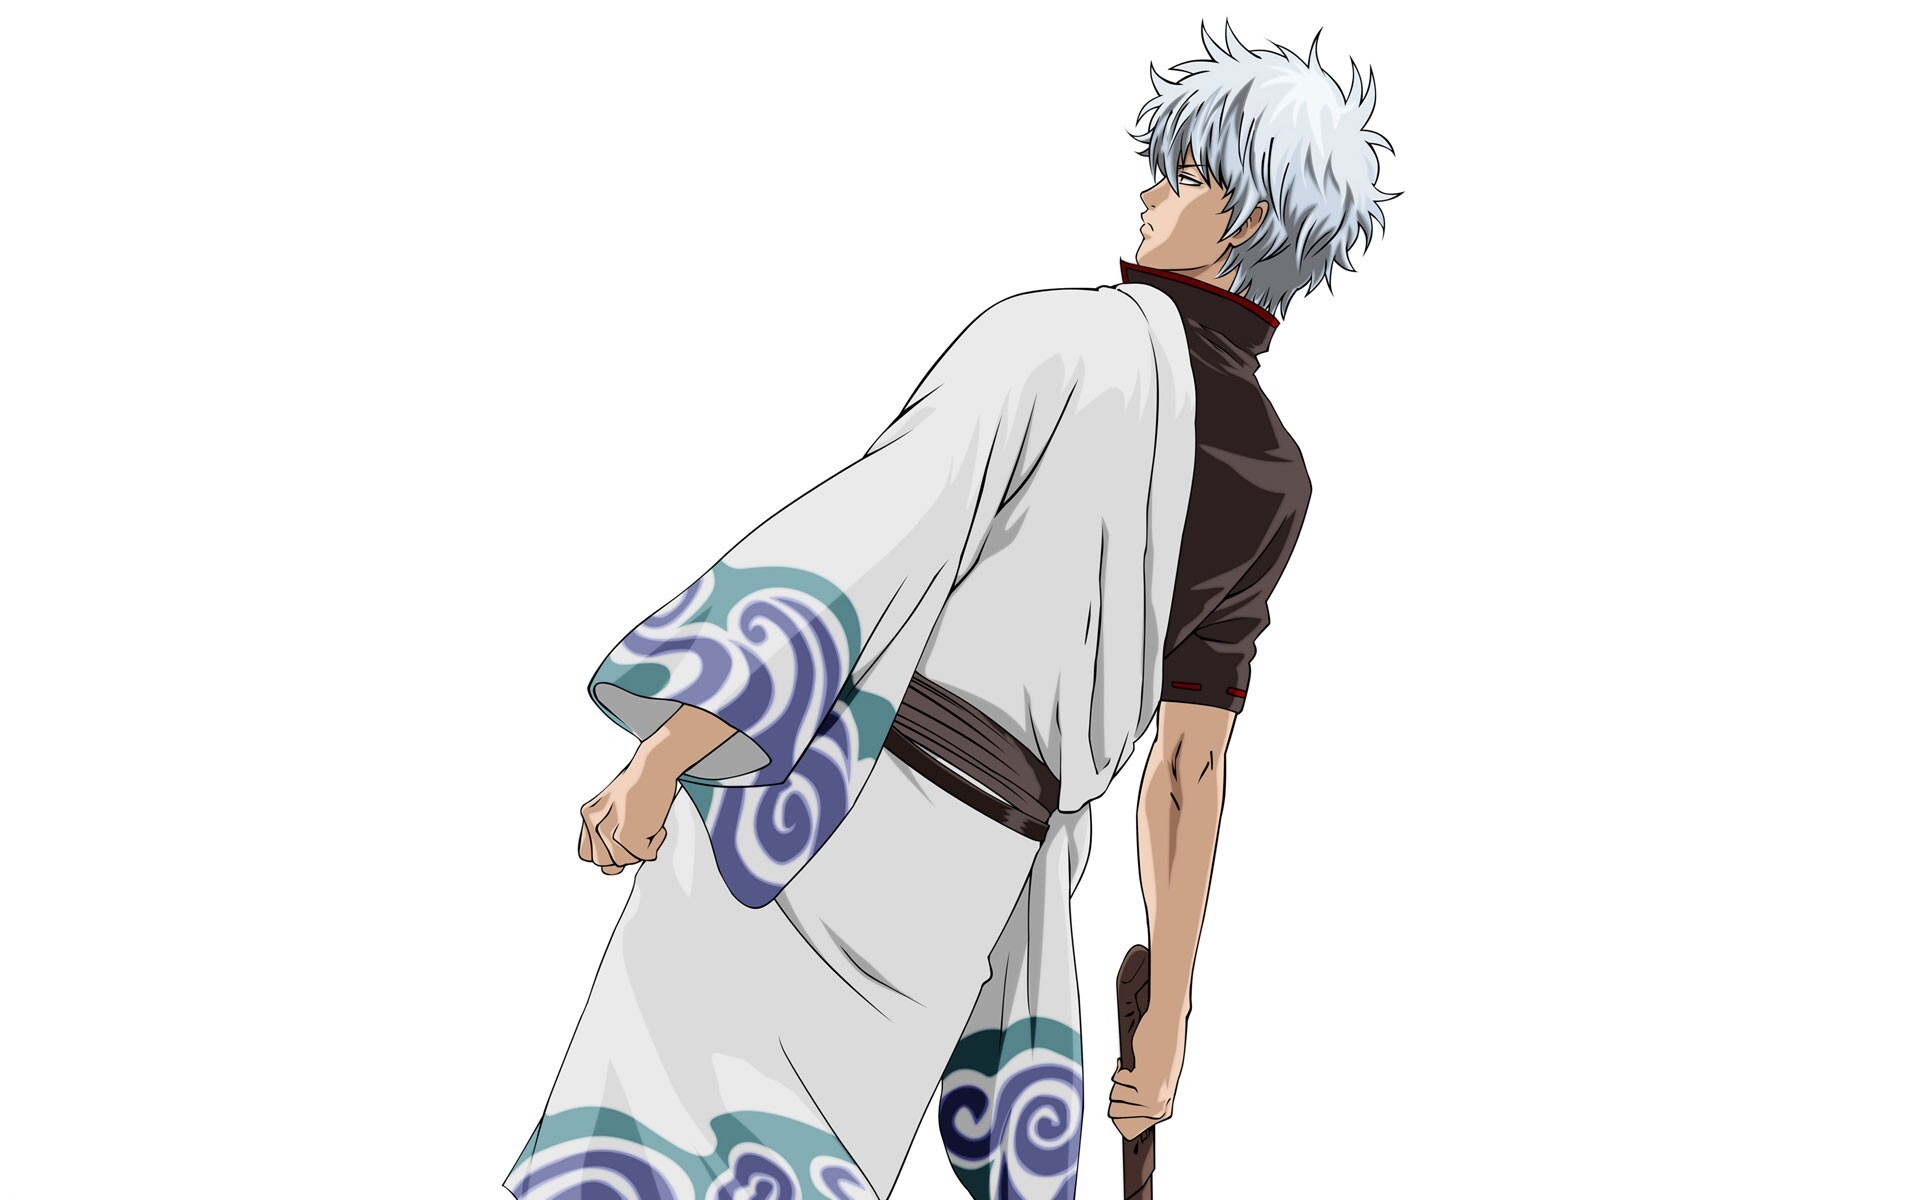 Gintoki Sakata: The main protagonist of the Gintama series, Known for physical strength, Extreme level of endurance. 1920x1200 HD Wallpaper.